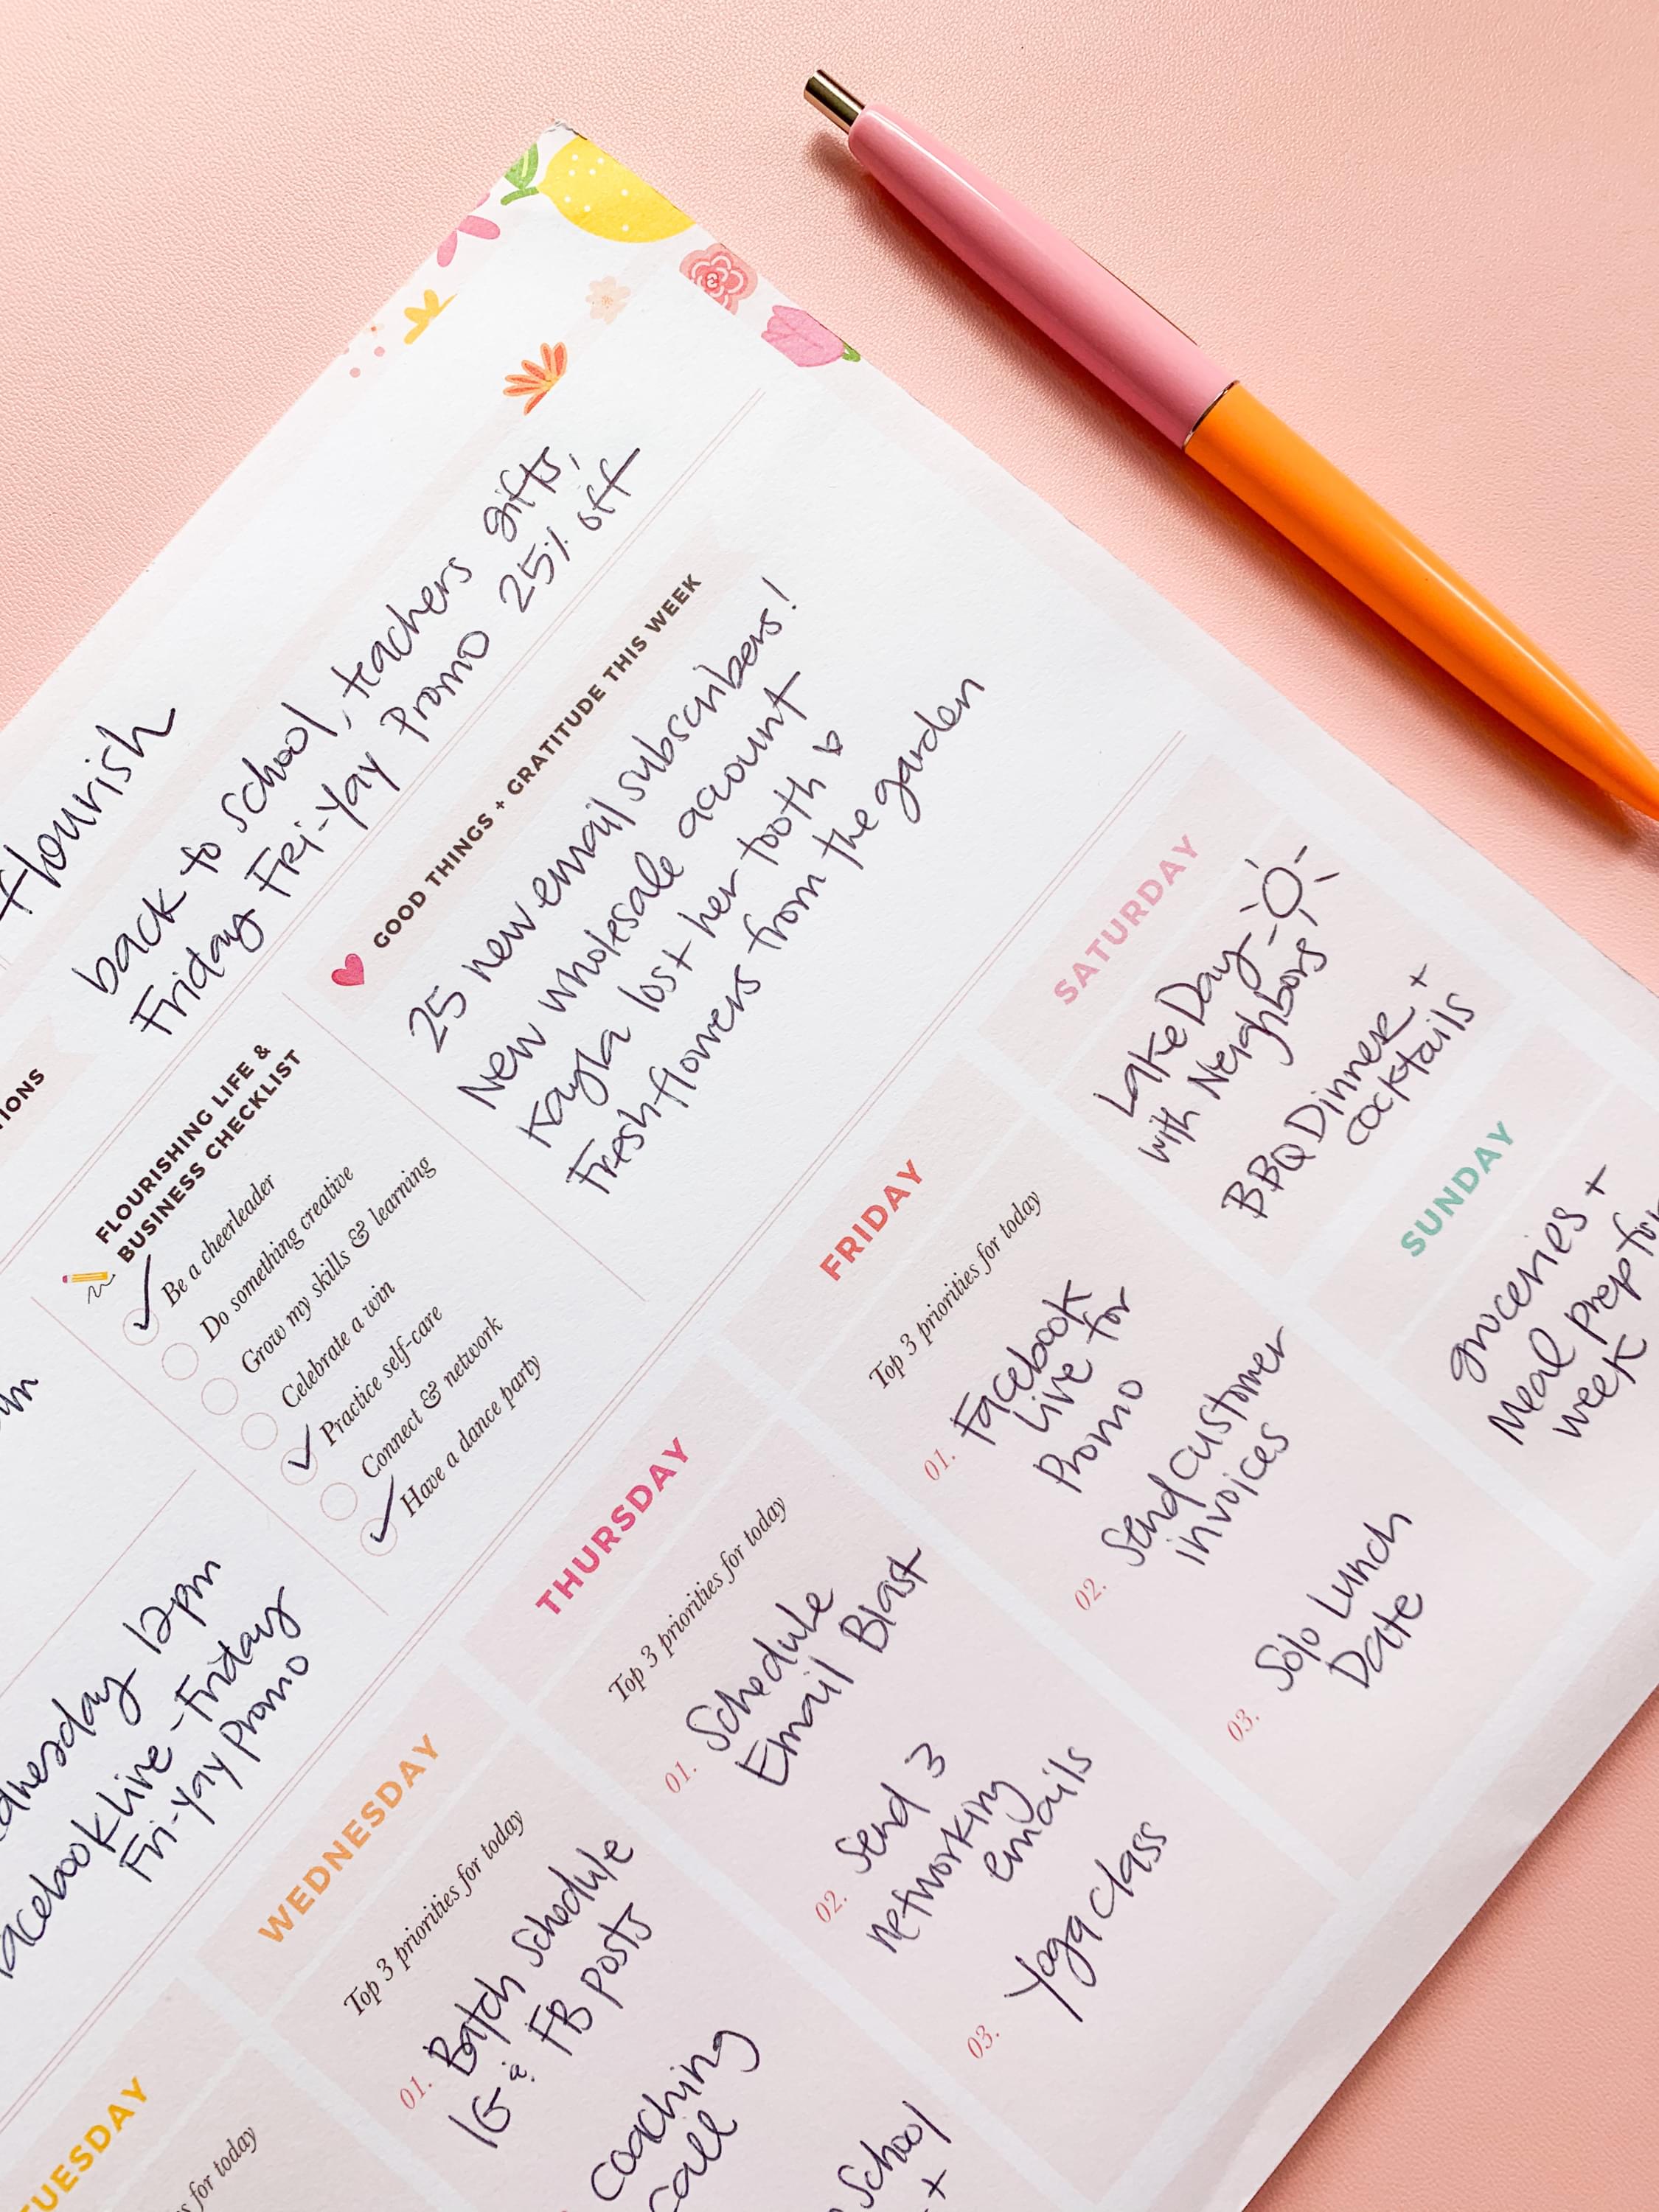 Free weekly business planner on desk